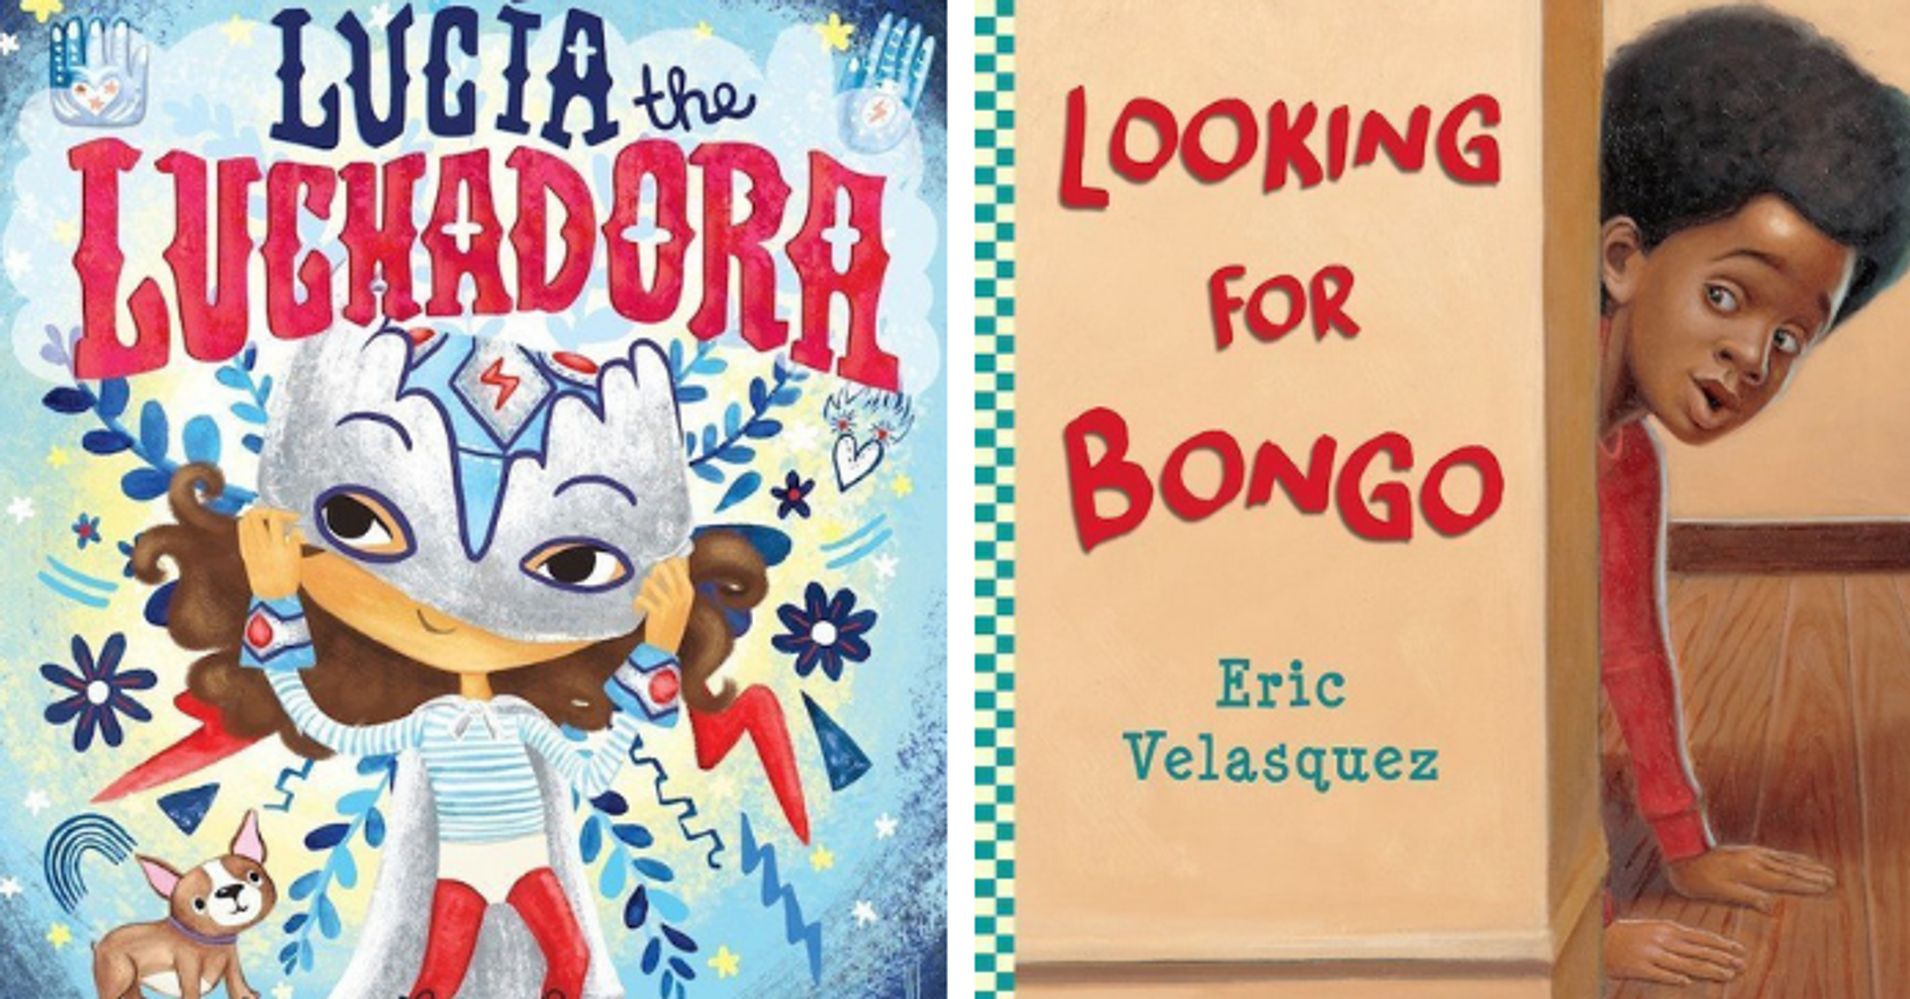 19 Children's Books To Read In Honor Of Hispanic Heritage Month